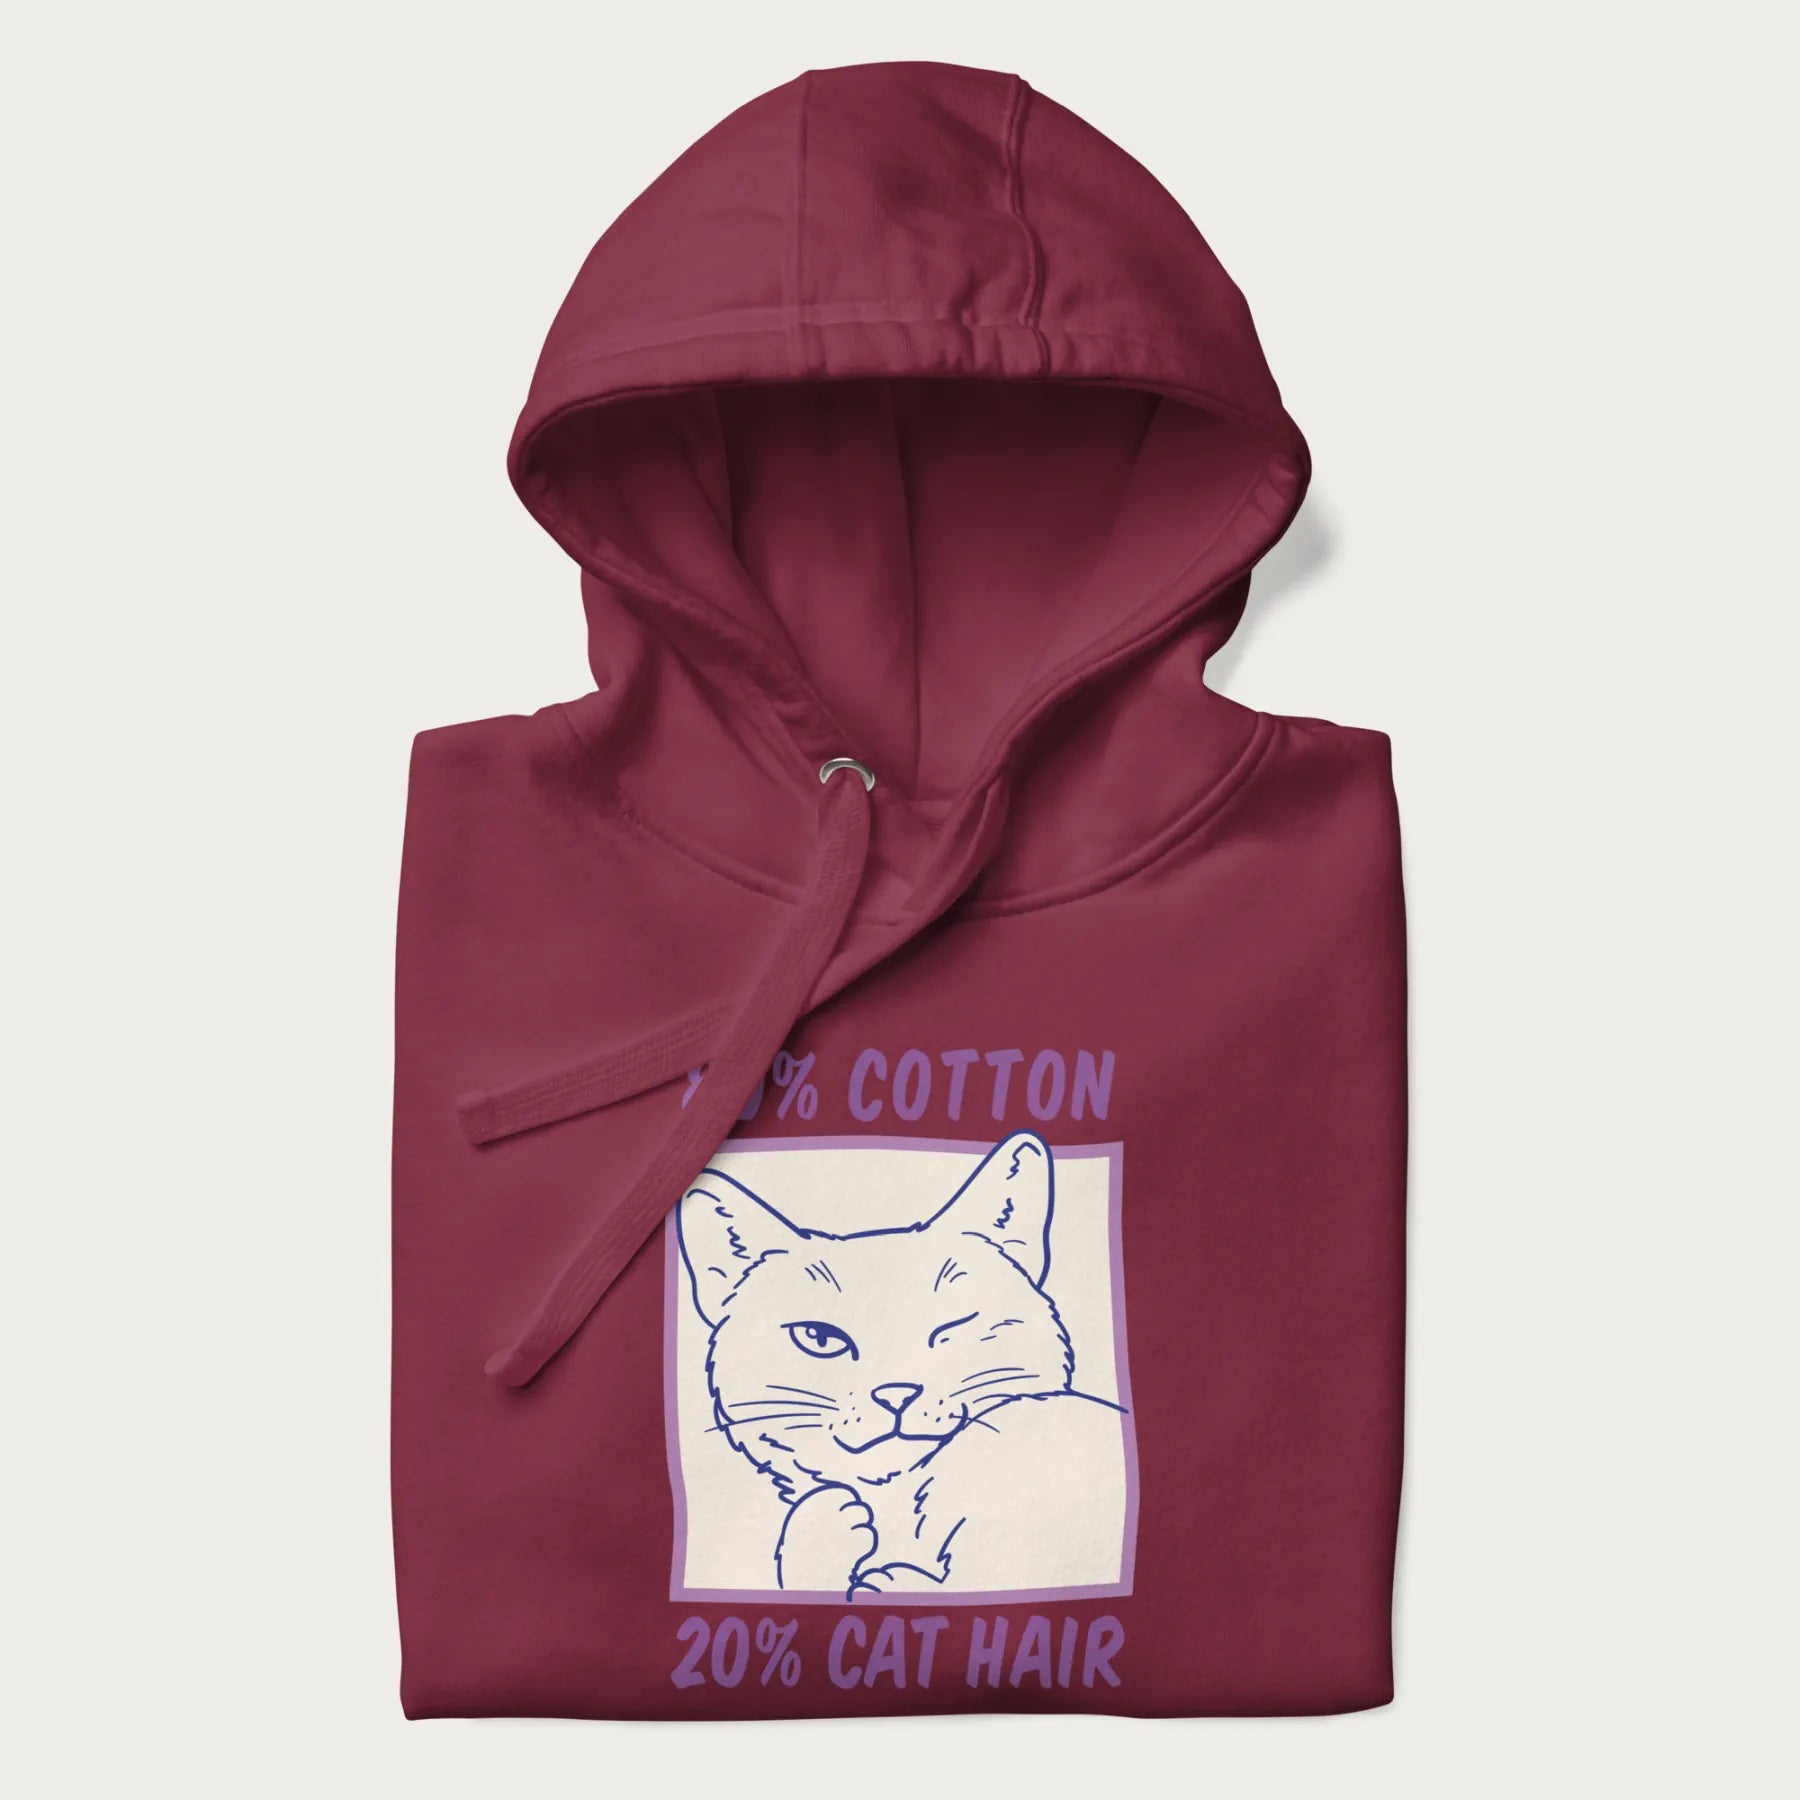 Folded maroon hoodie with graphic of a winking cat with the text "80% cotton 20% cat hair".